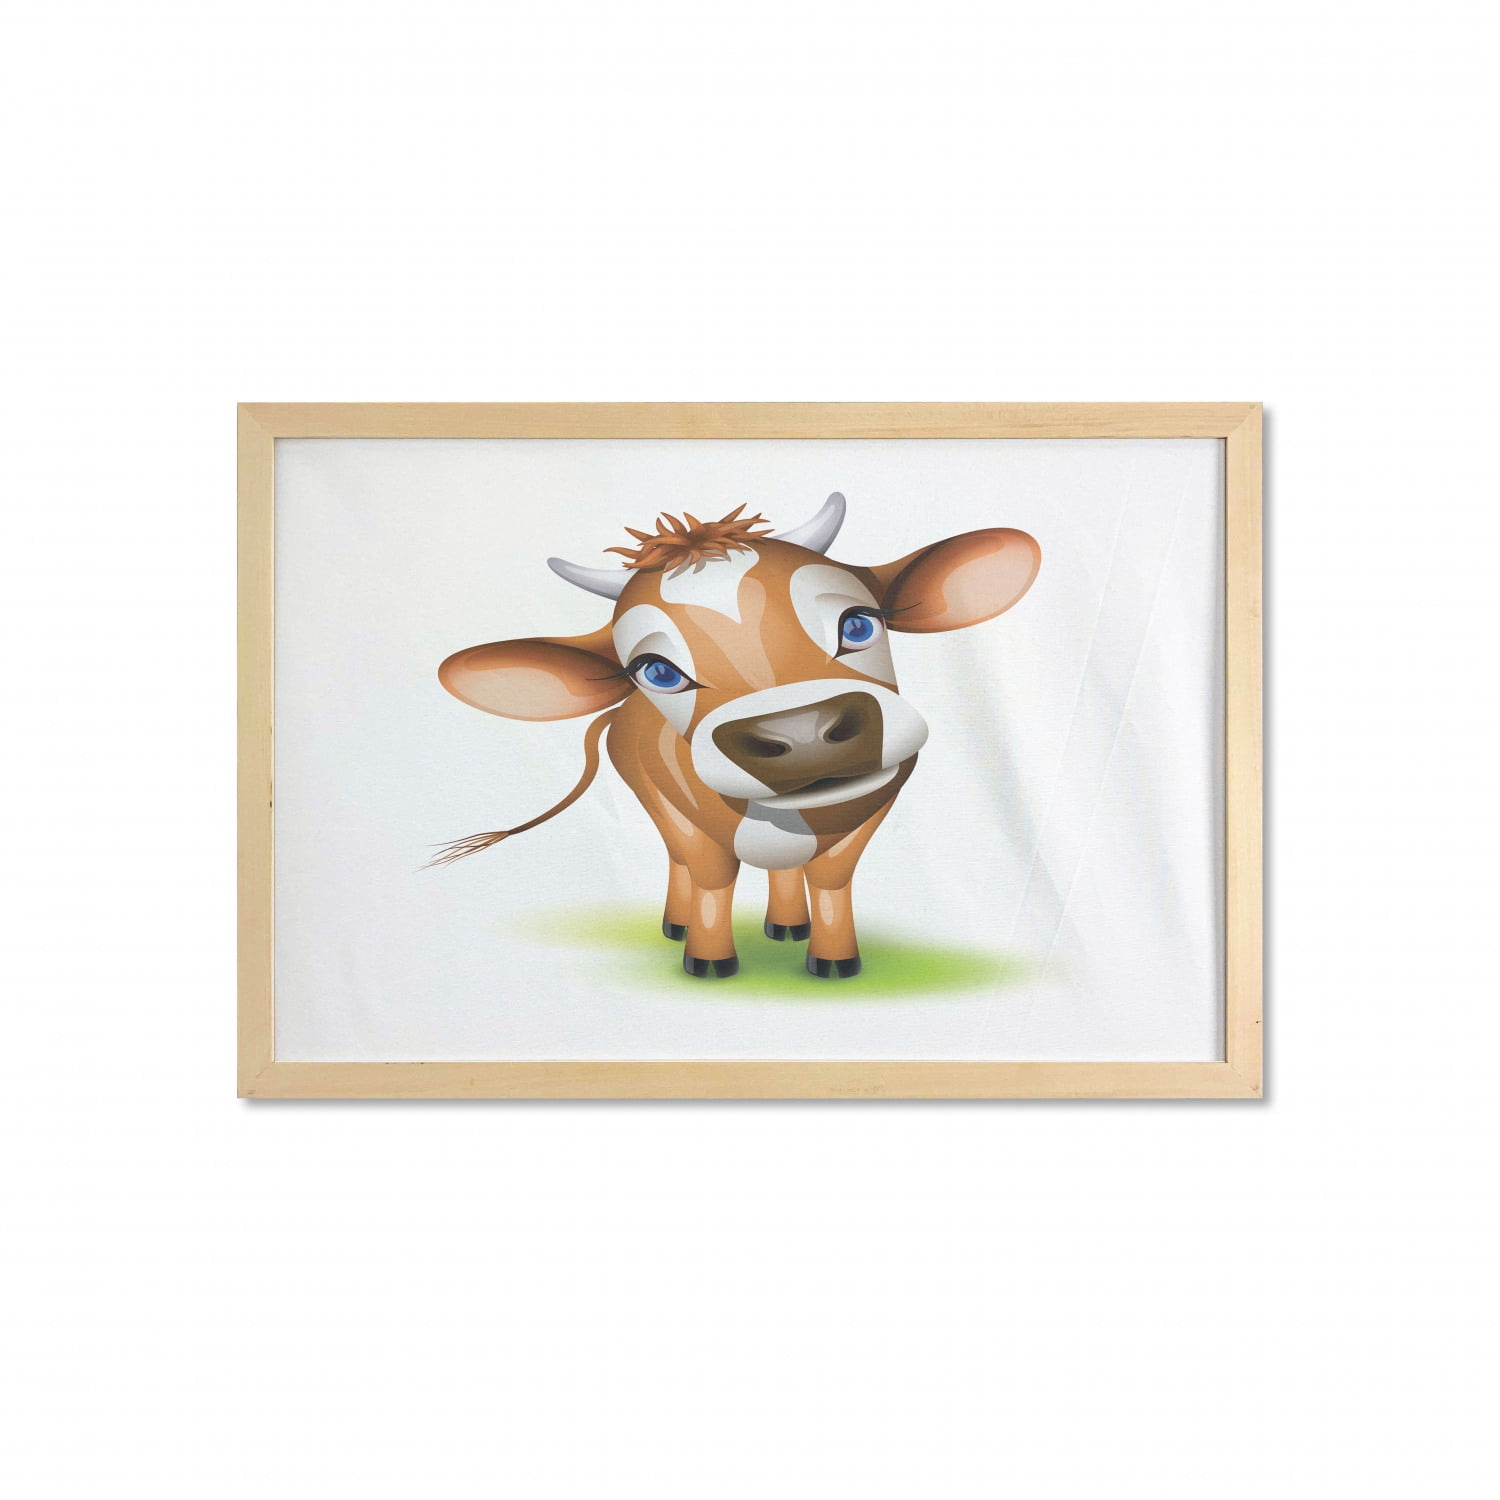 Cartoon Wall Art with Frame, Digitally Composed Cow with Captivating Eyes  Livestock Theme, Printed Fabric Poster for Bathroom Living Room Dorms, 35